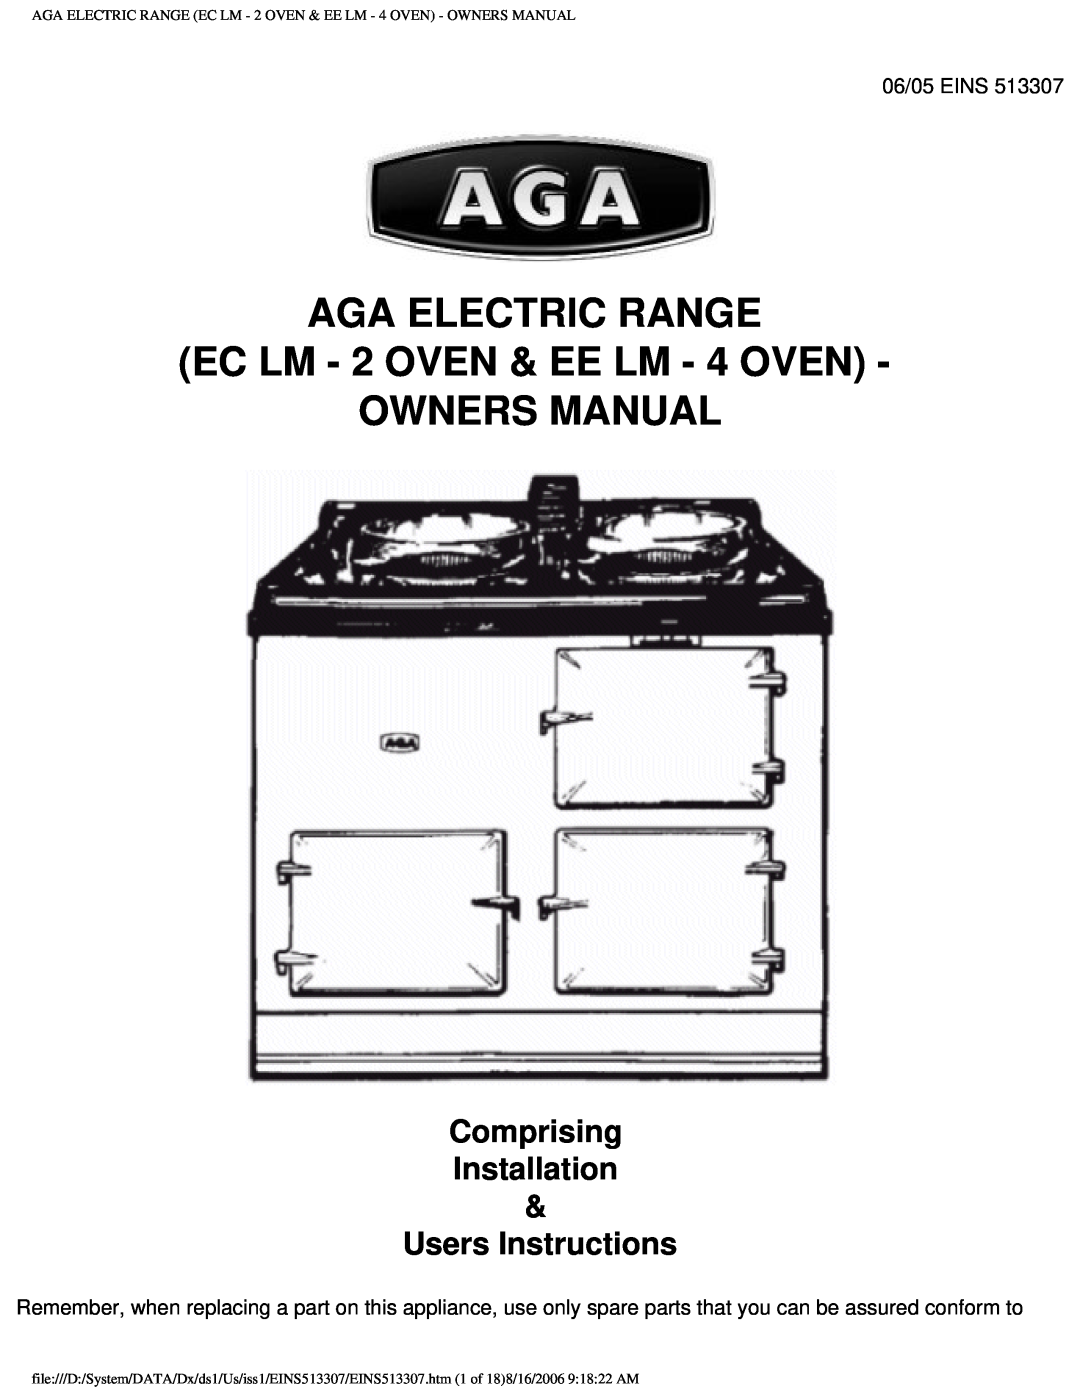 Aga Ranges EINS513307 owner manual Aga Electric Range, EC LM - 2 OVEN & EE LM - 4 OVEN OWNERS MANUAL 